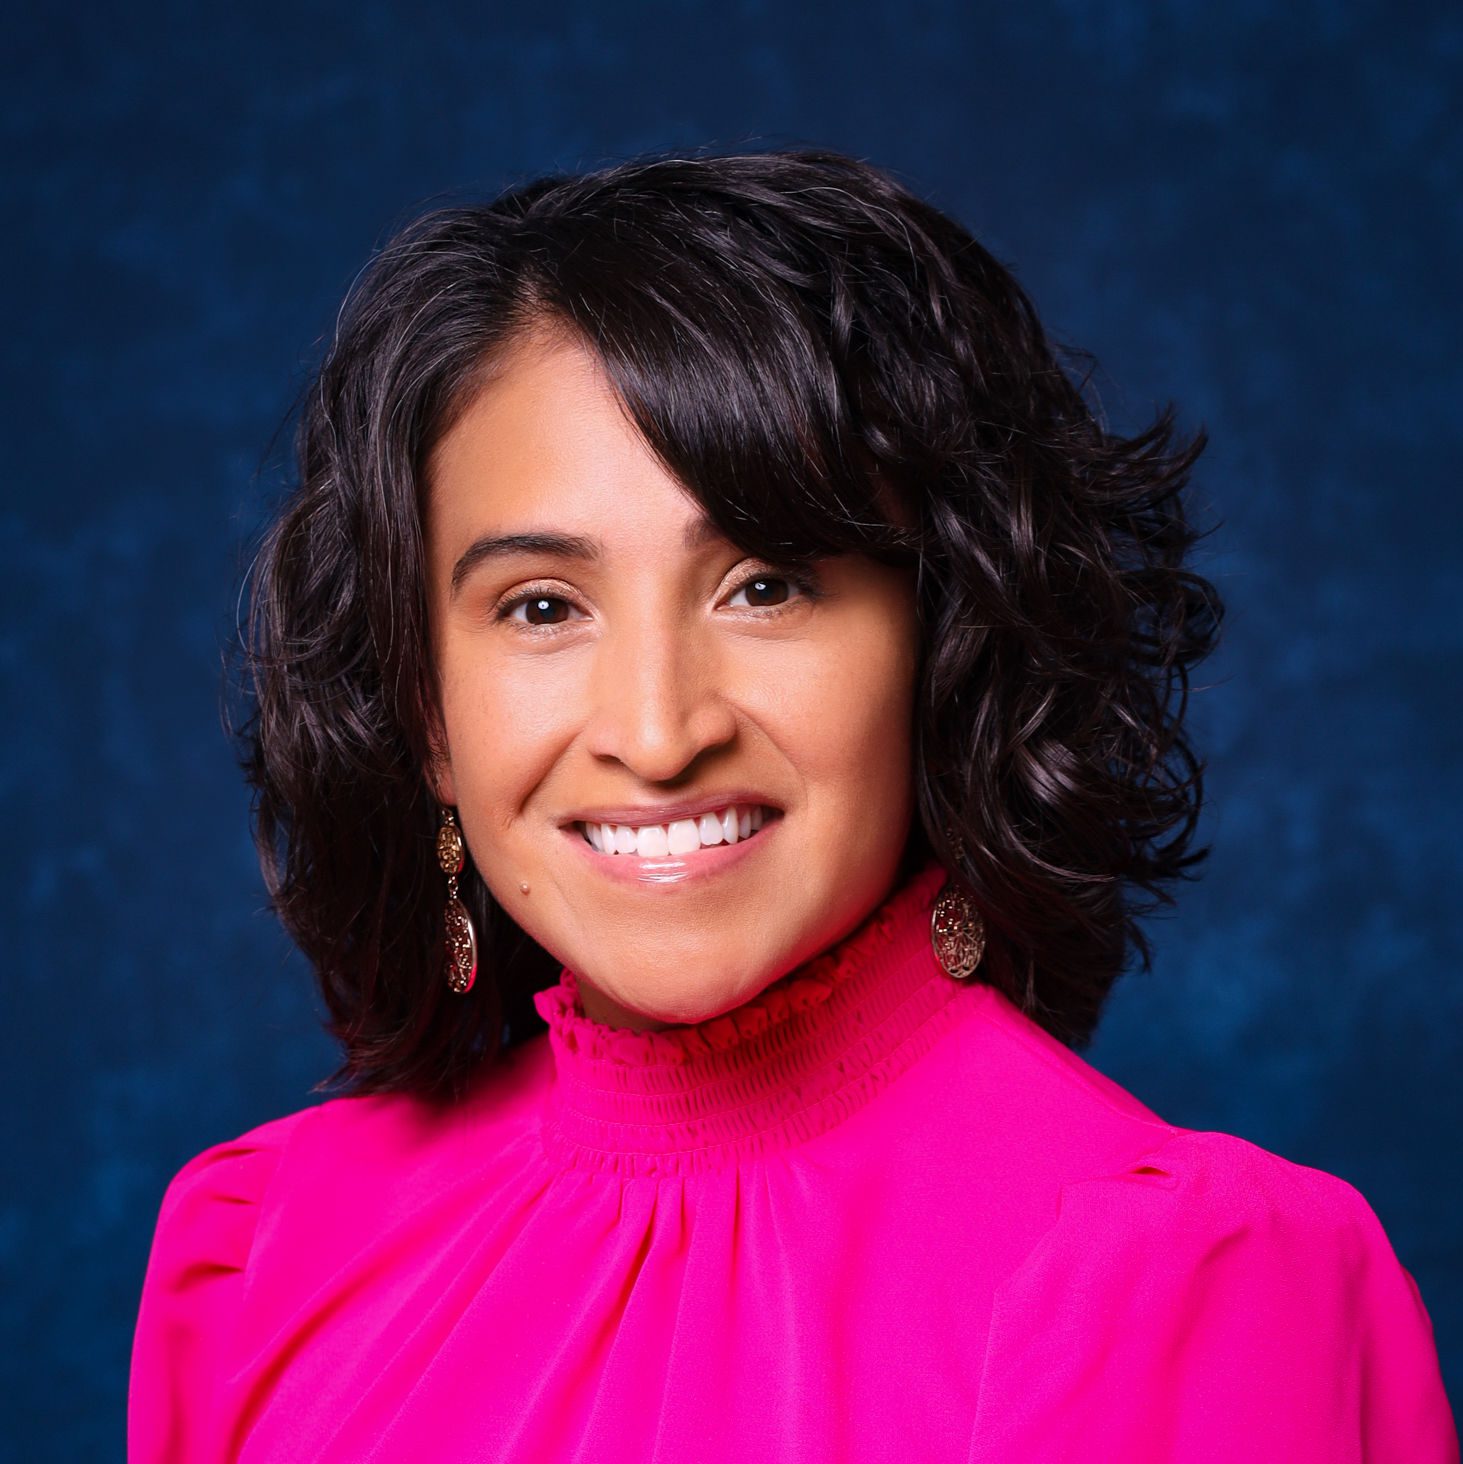 Photo shows a headshot of Norma Gutierrez in a bright pink blouse with a high collar. Gutierrez works as the Assistant Director of Student Experience at Noble Schools, a charter school network in Chicago, IL.